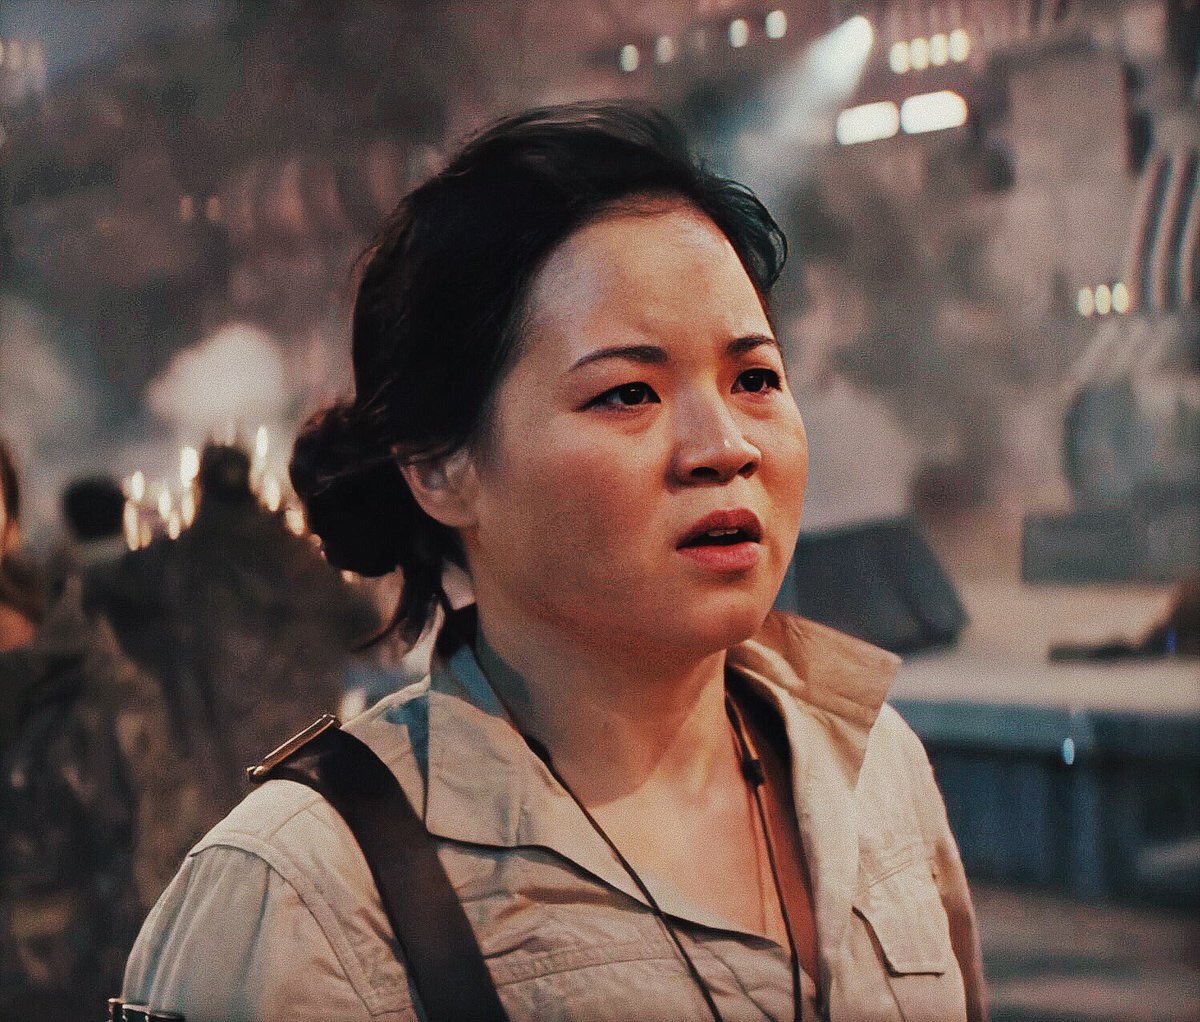 - Rose Tico (portrayed by Kelly Marie Tran) “That’s how we’re gonna win. Not fighting what we hate, but saving what we love”